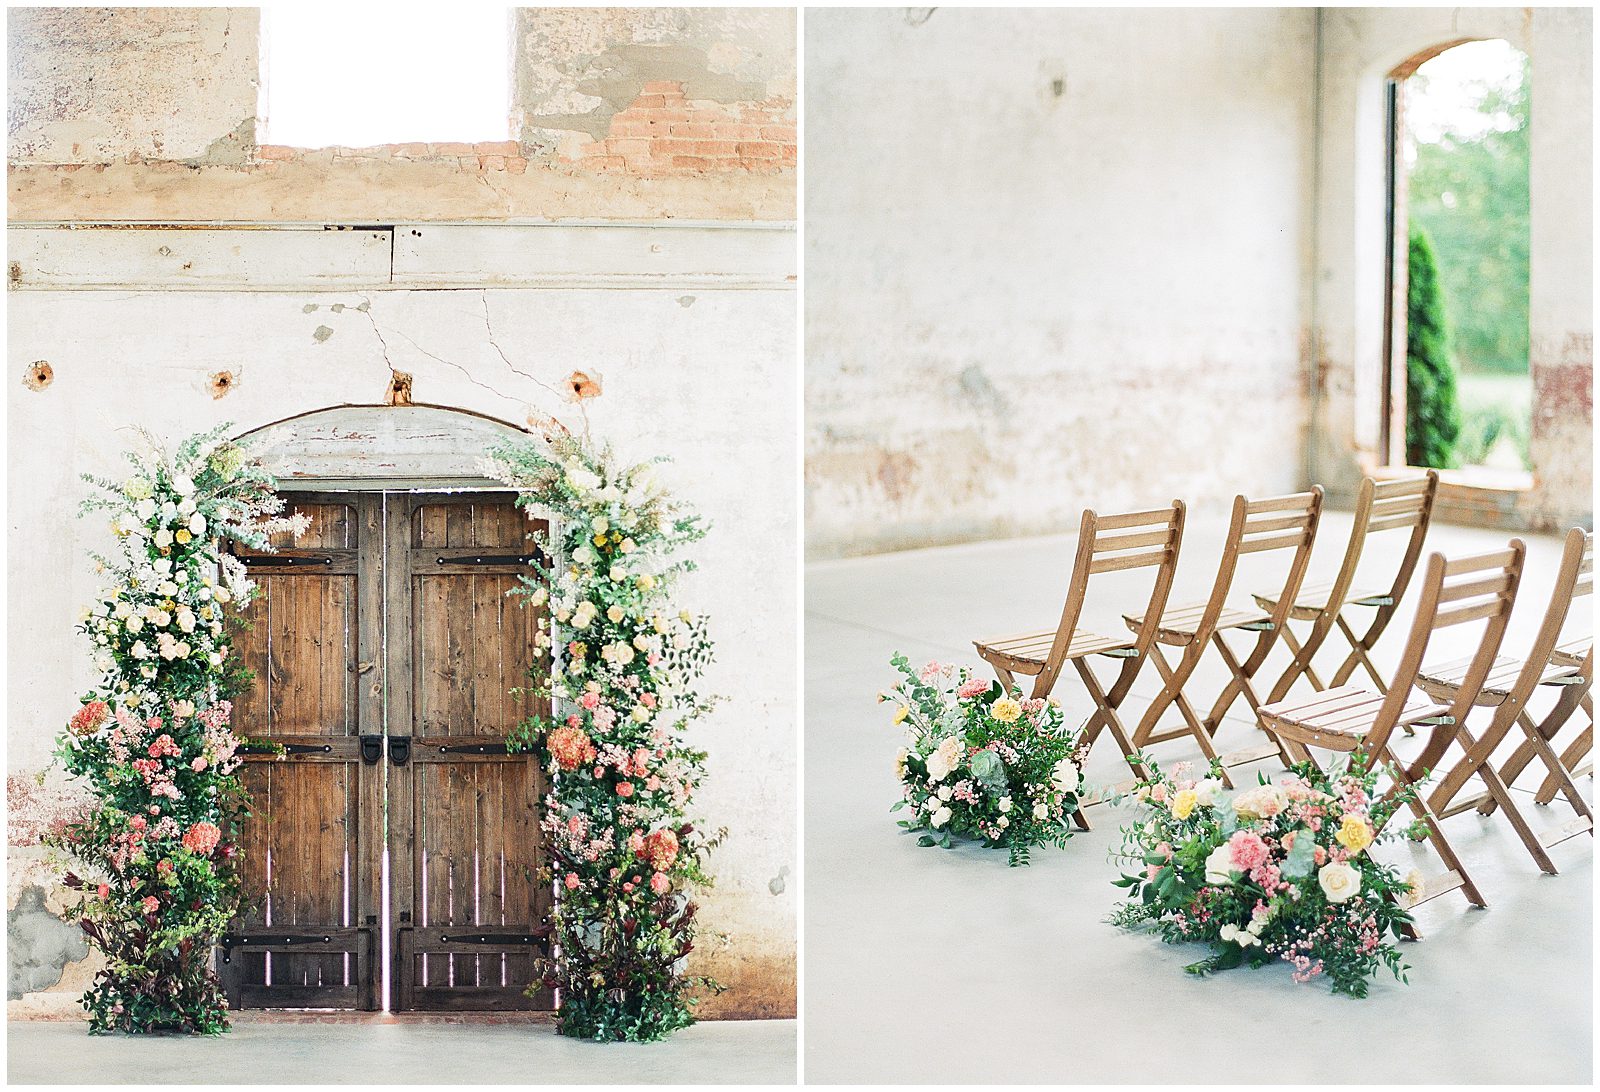 Providence Cotton Mill Flower arch around doors and flowers on floor by chairs Photos